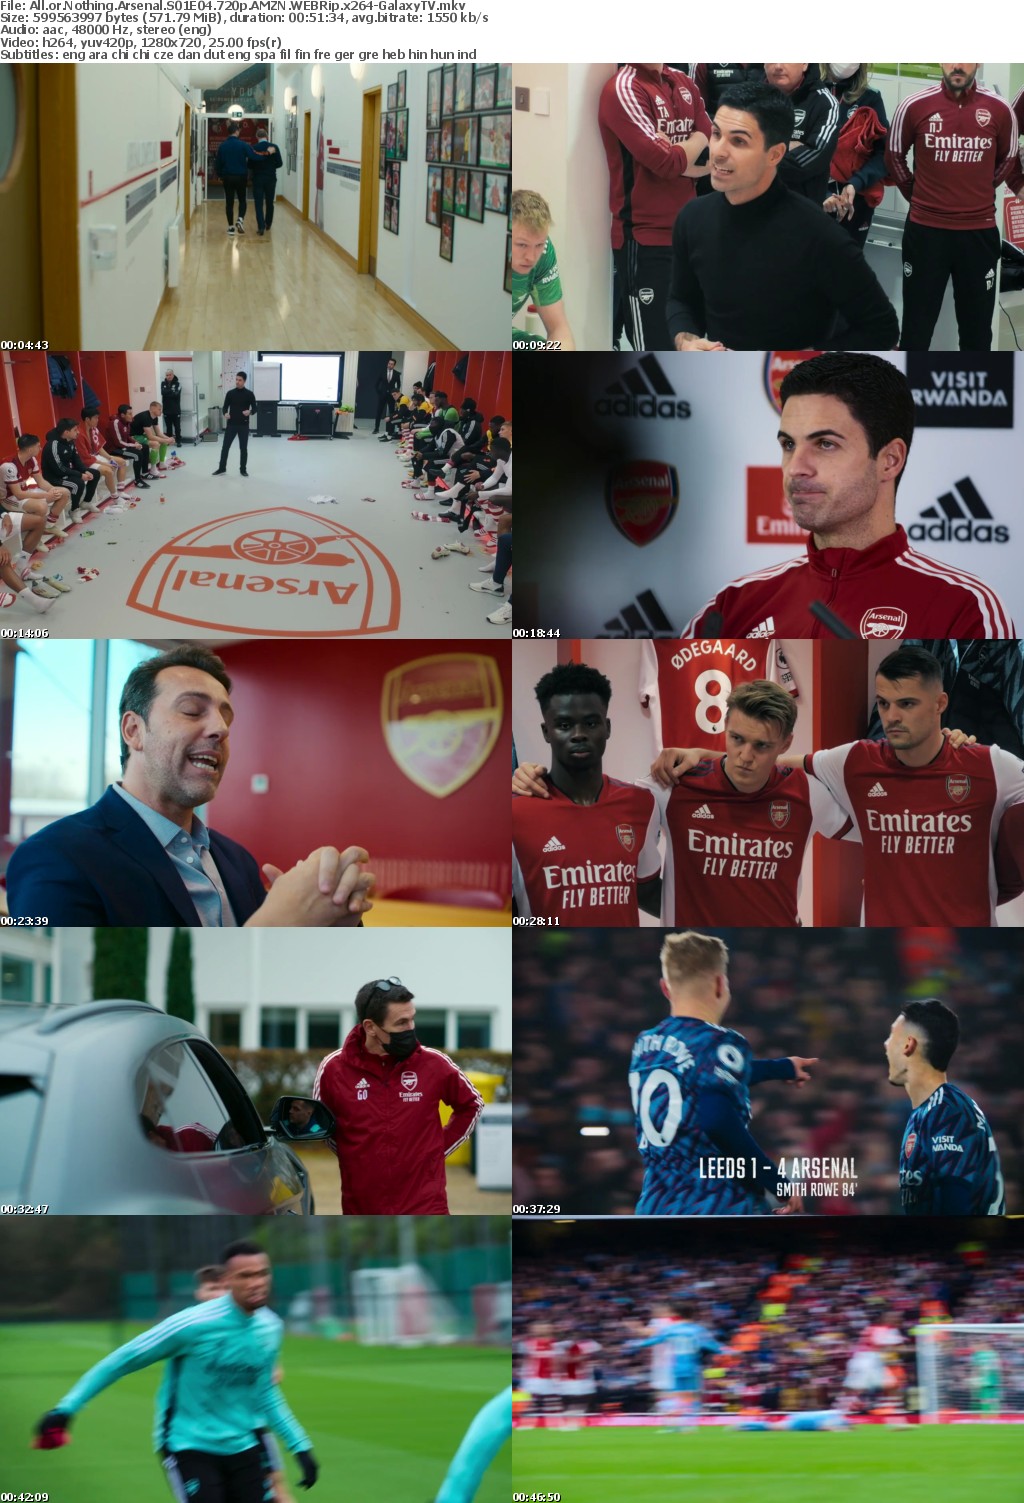 All or Nothing Arsenal S01 COMPLETE REPACK 720p AMZN WEBRip x264-GalaxyTV